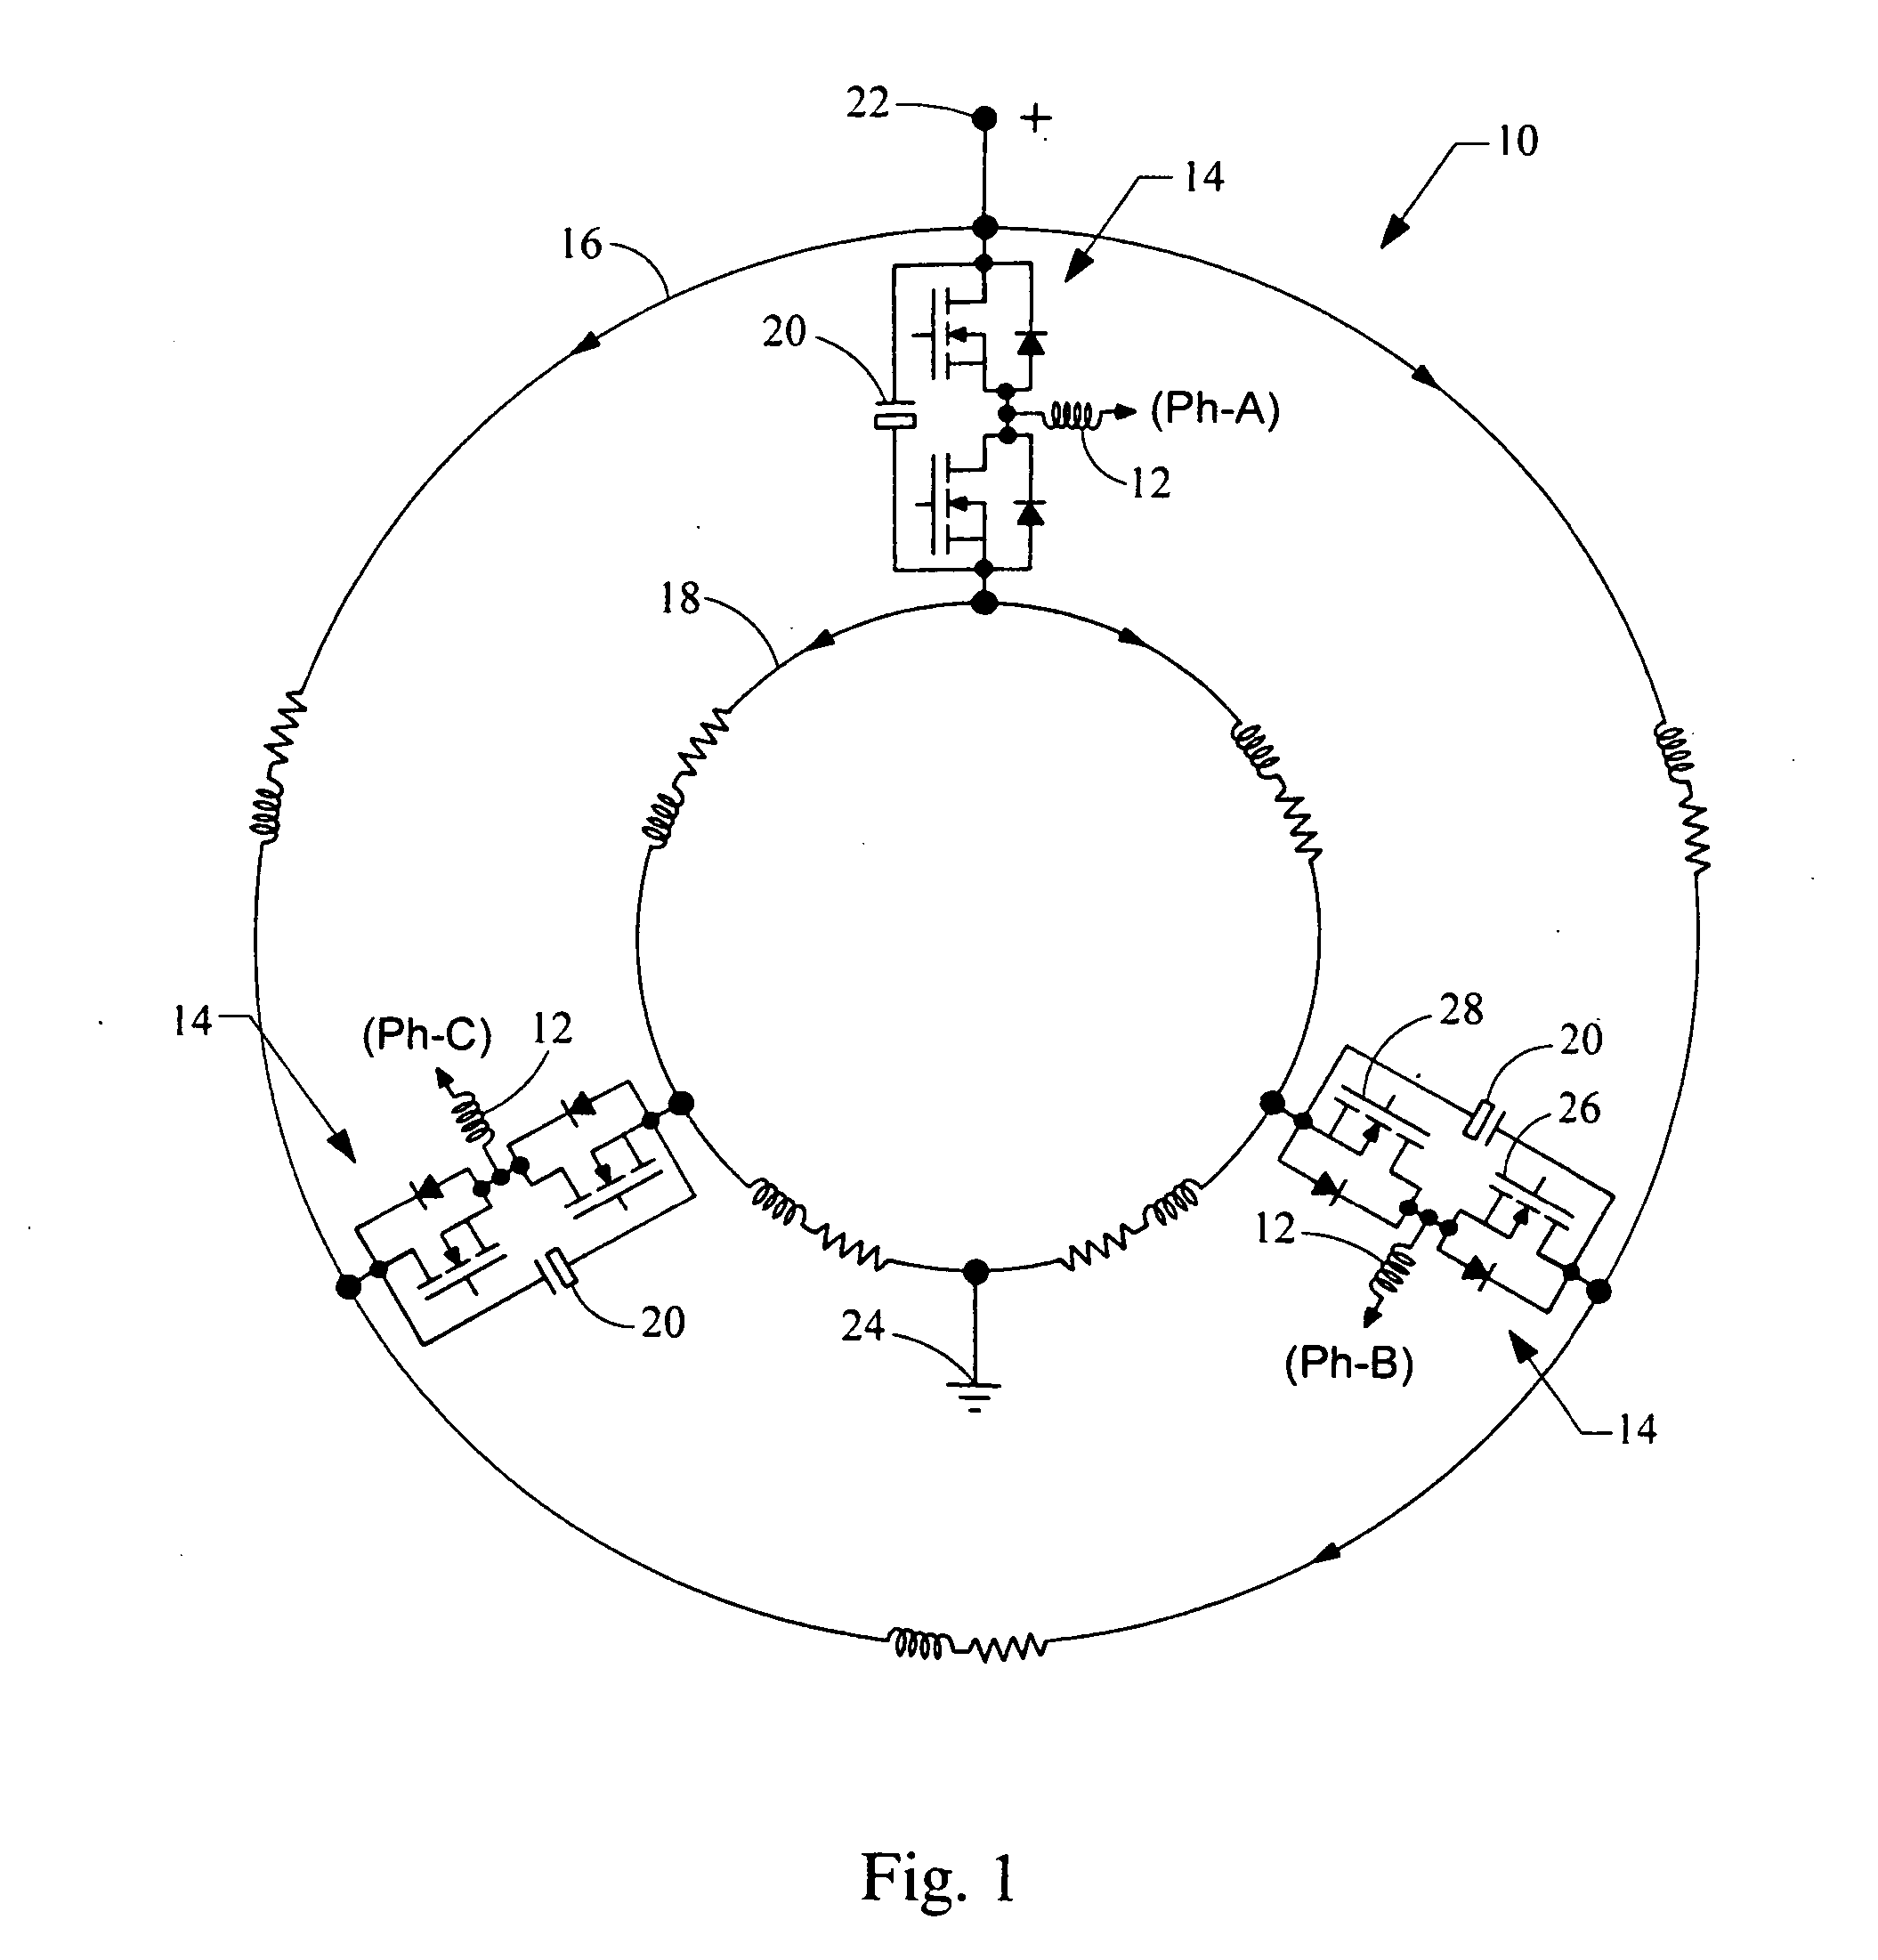 Electric machine with integrated electronics in a circular/closed-loop arrangement